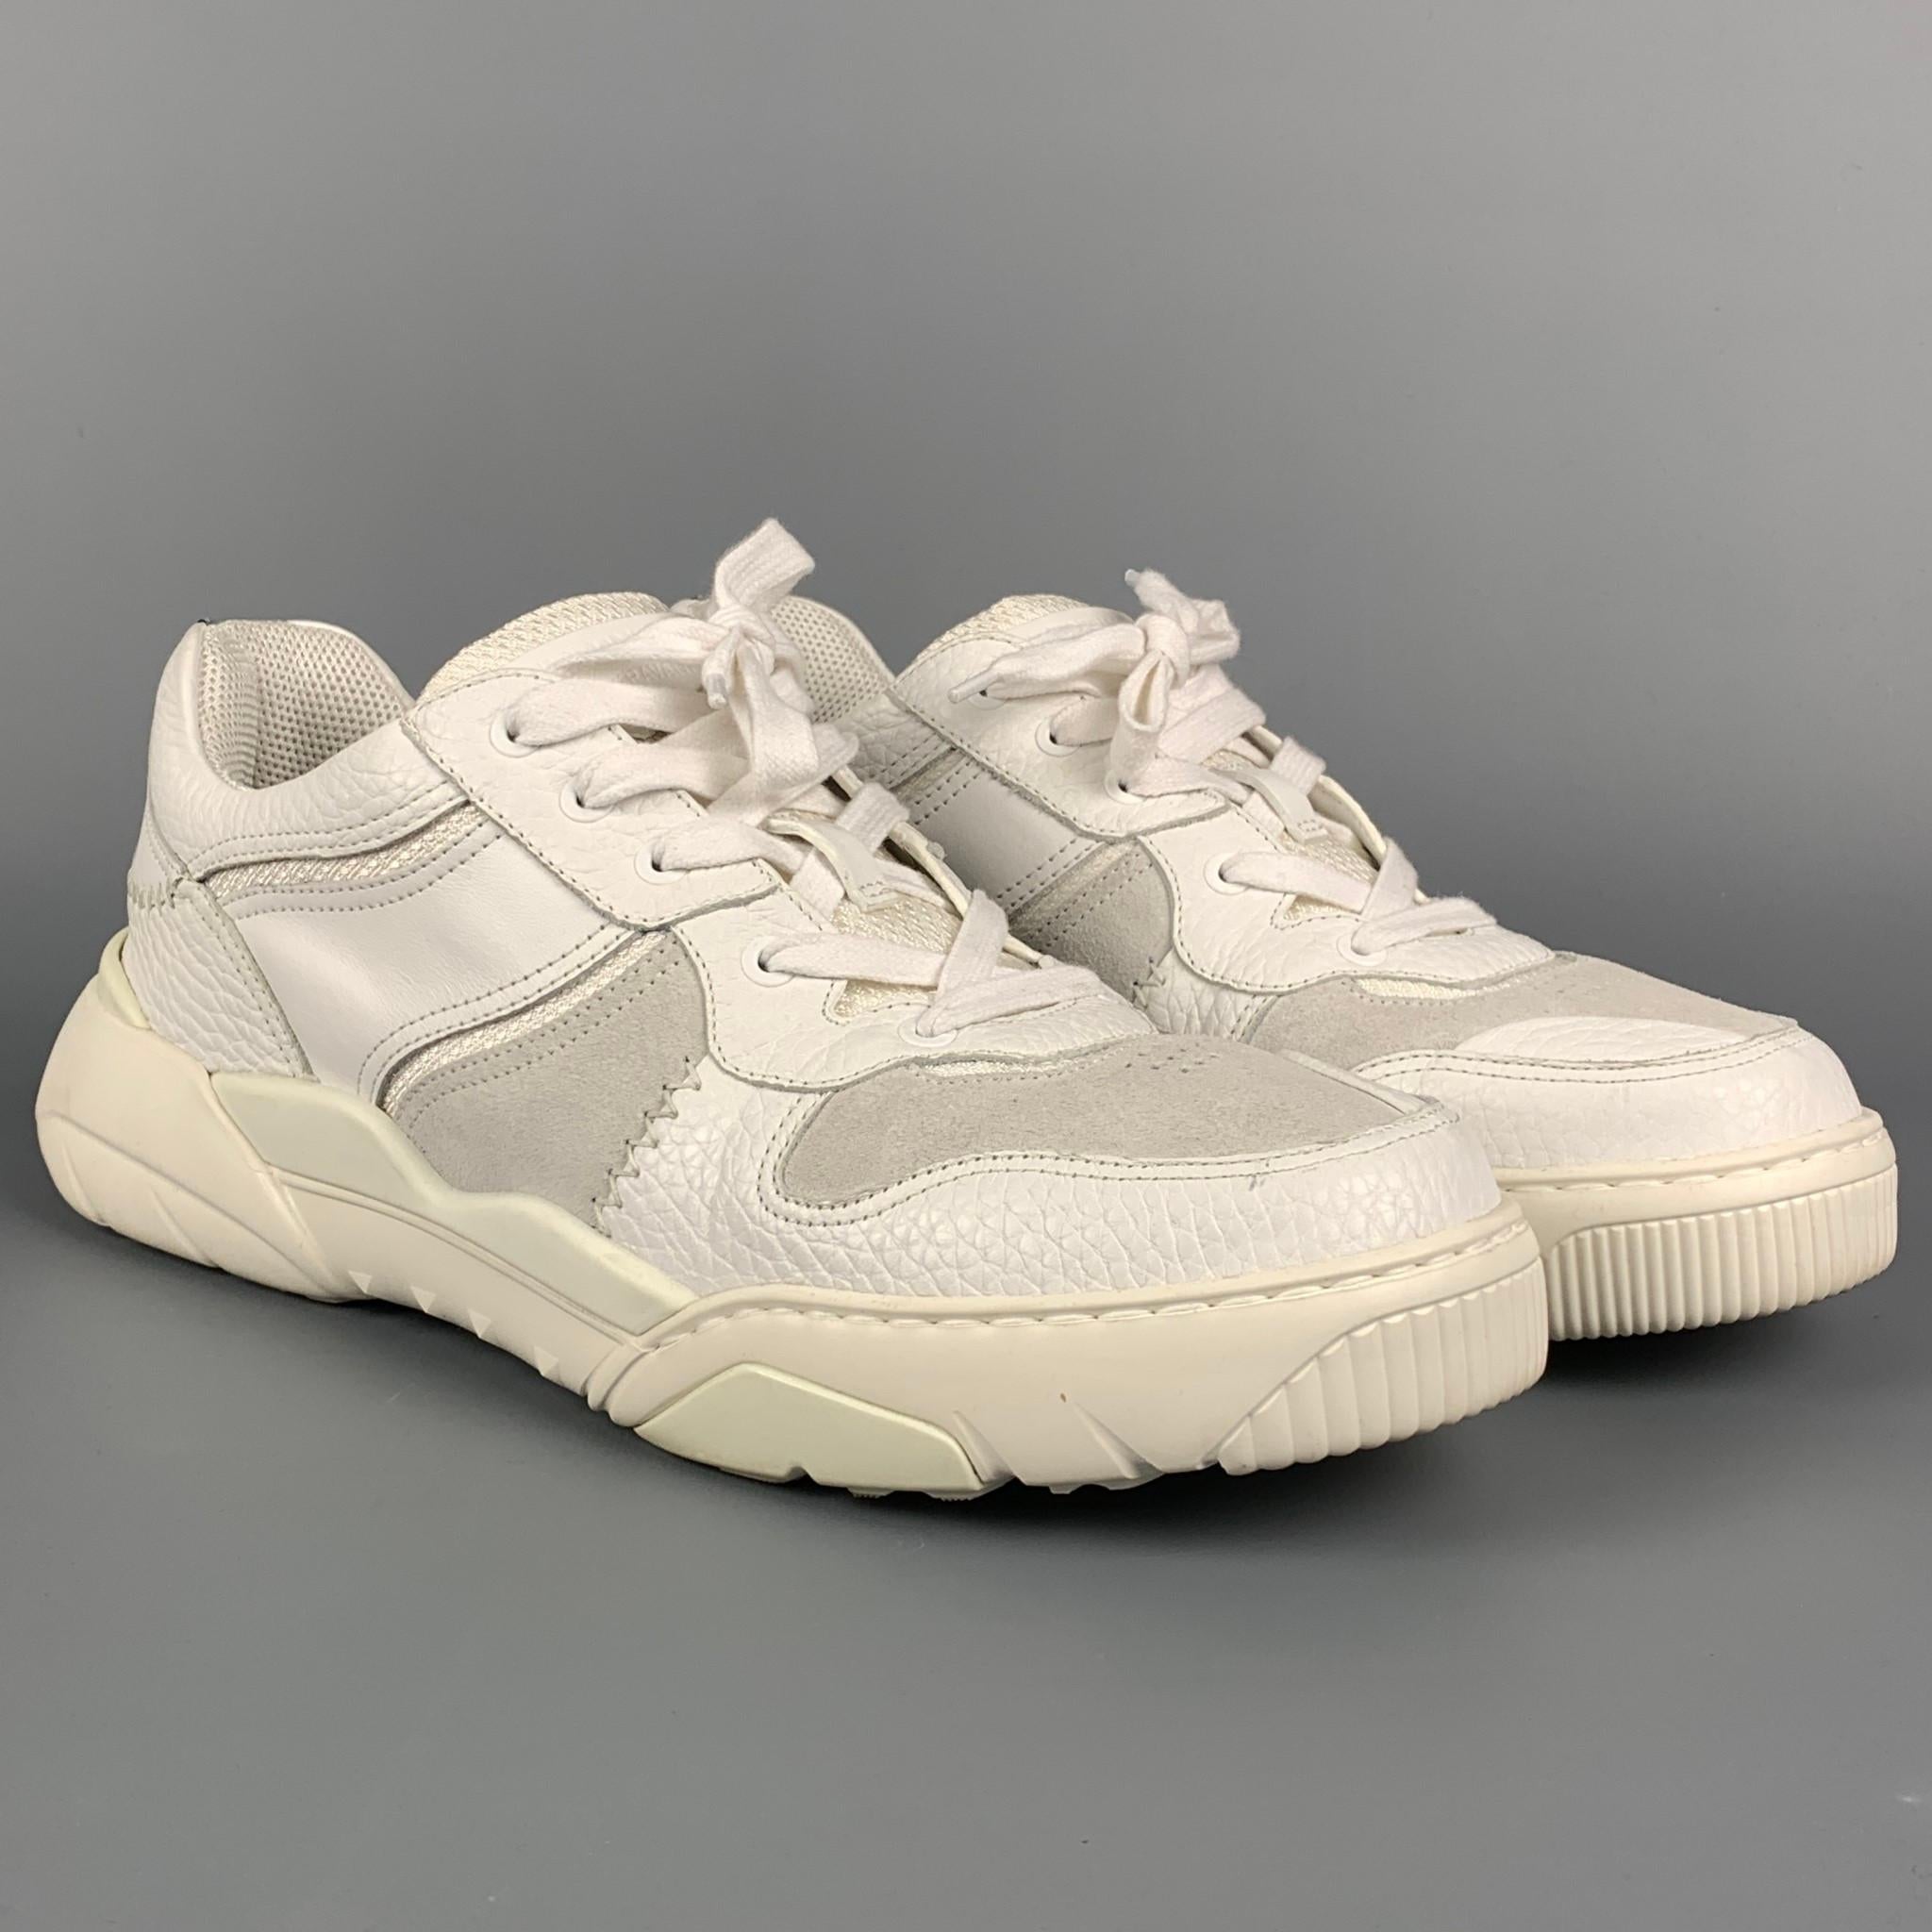 VALENTINO sneakers comes in a white & light grey leather featuring a chunky rubber sole, top stitching, and a lace up closure. Made in Italy. 

Very Good Pre-Owned Condition.
Marked: TRB78Y2 45

Outsole: 13 in. x 4.5 in. 